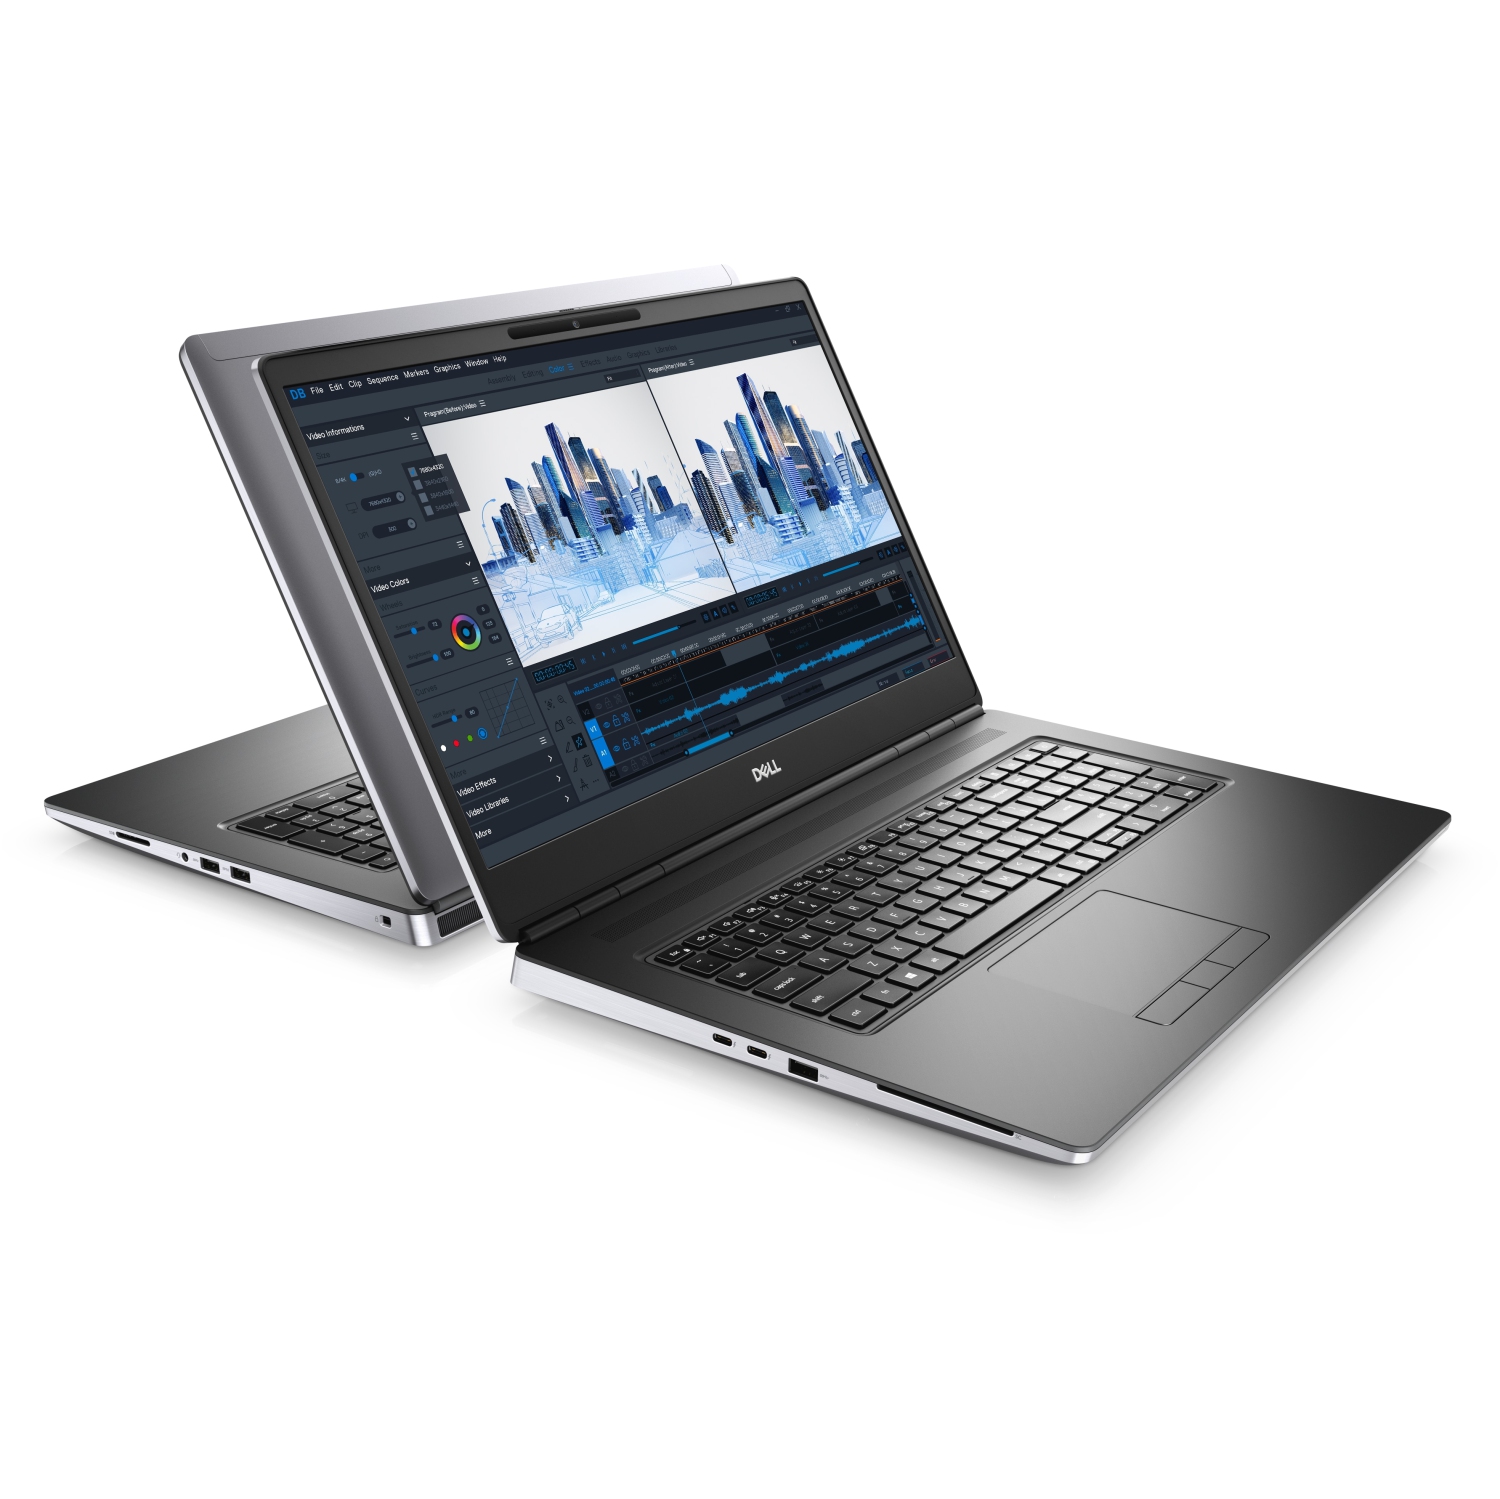 Refurbished (Excellent) - Dell Precision 7000 7760 Workstation Laptop (2021), 17.3" 4K, Core i9, 1TB SSD + 512GB SSD, 64GB RAM, RTX A5000, 5 GHz, 11th Gen CPU Certified